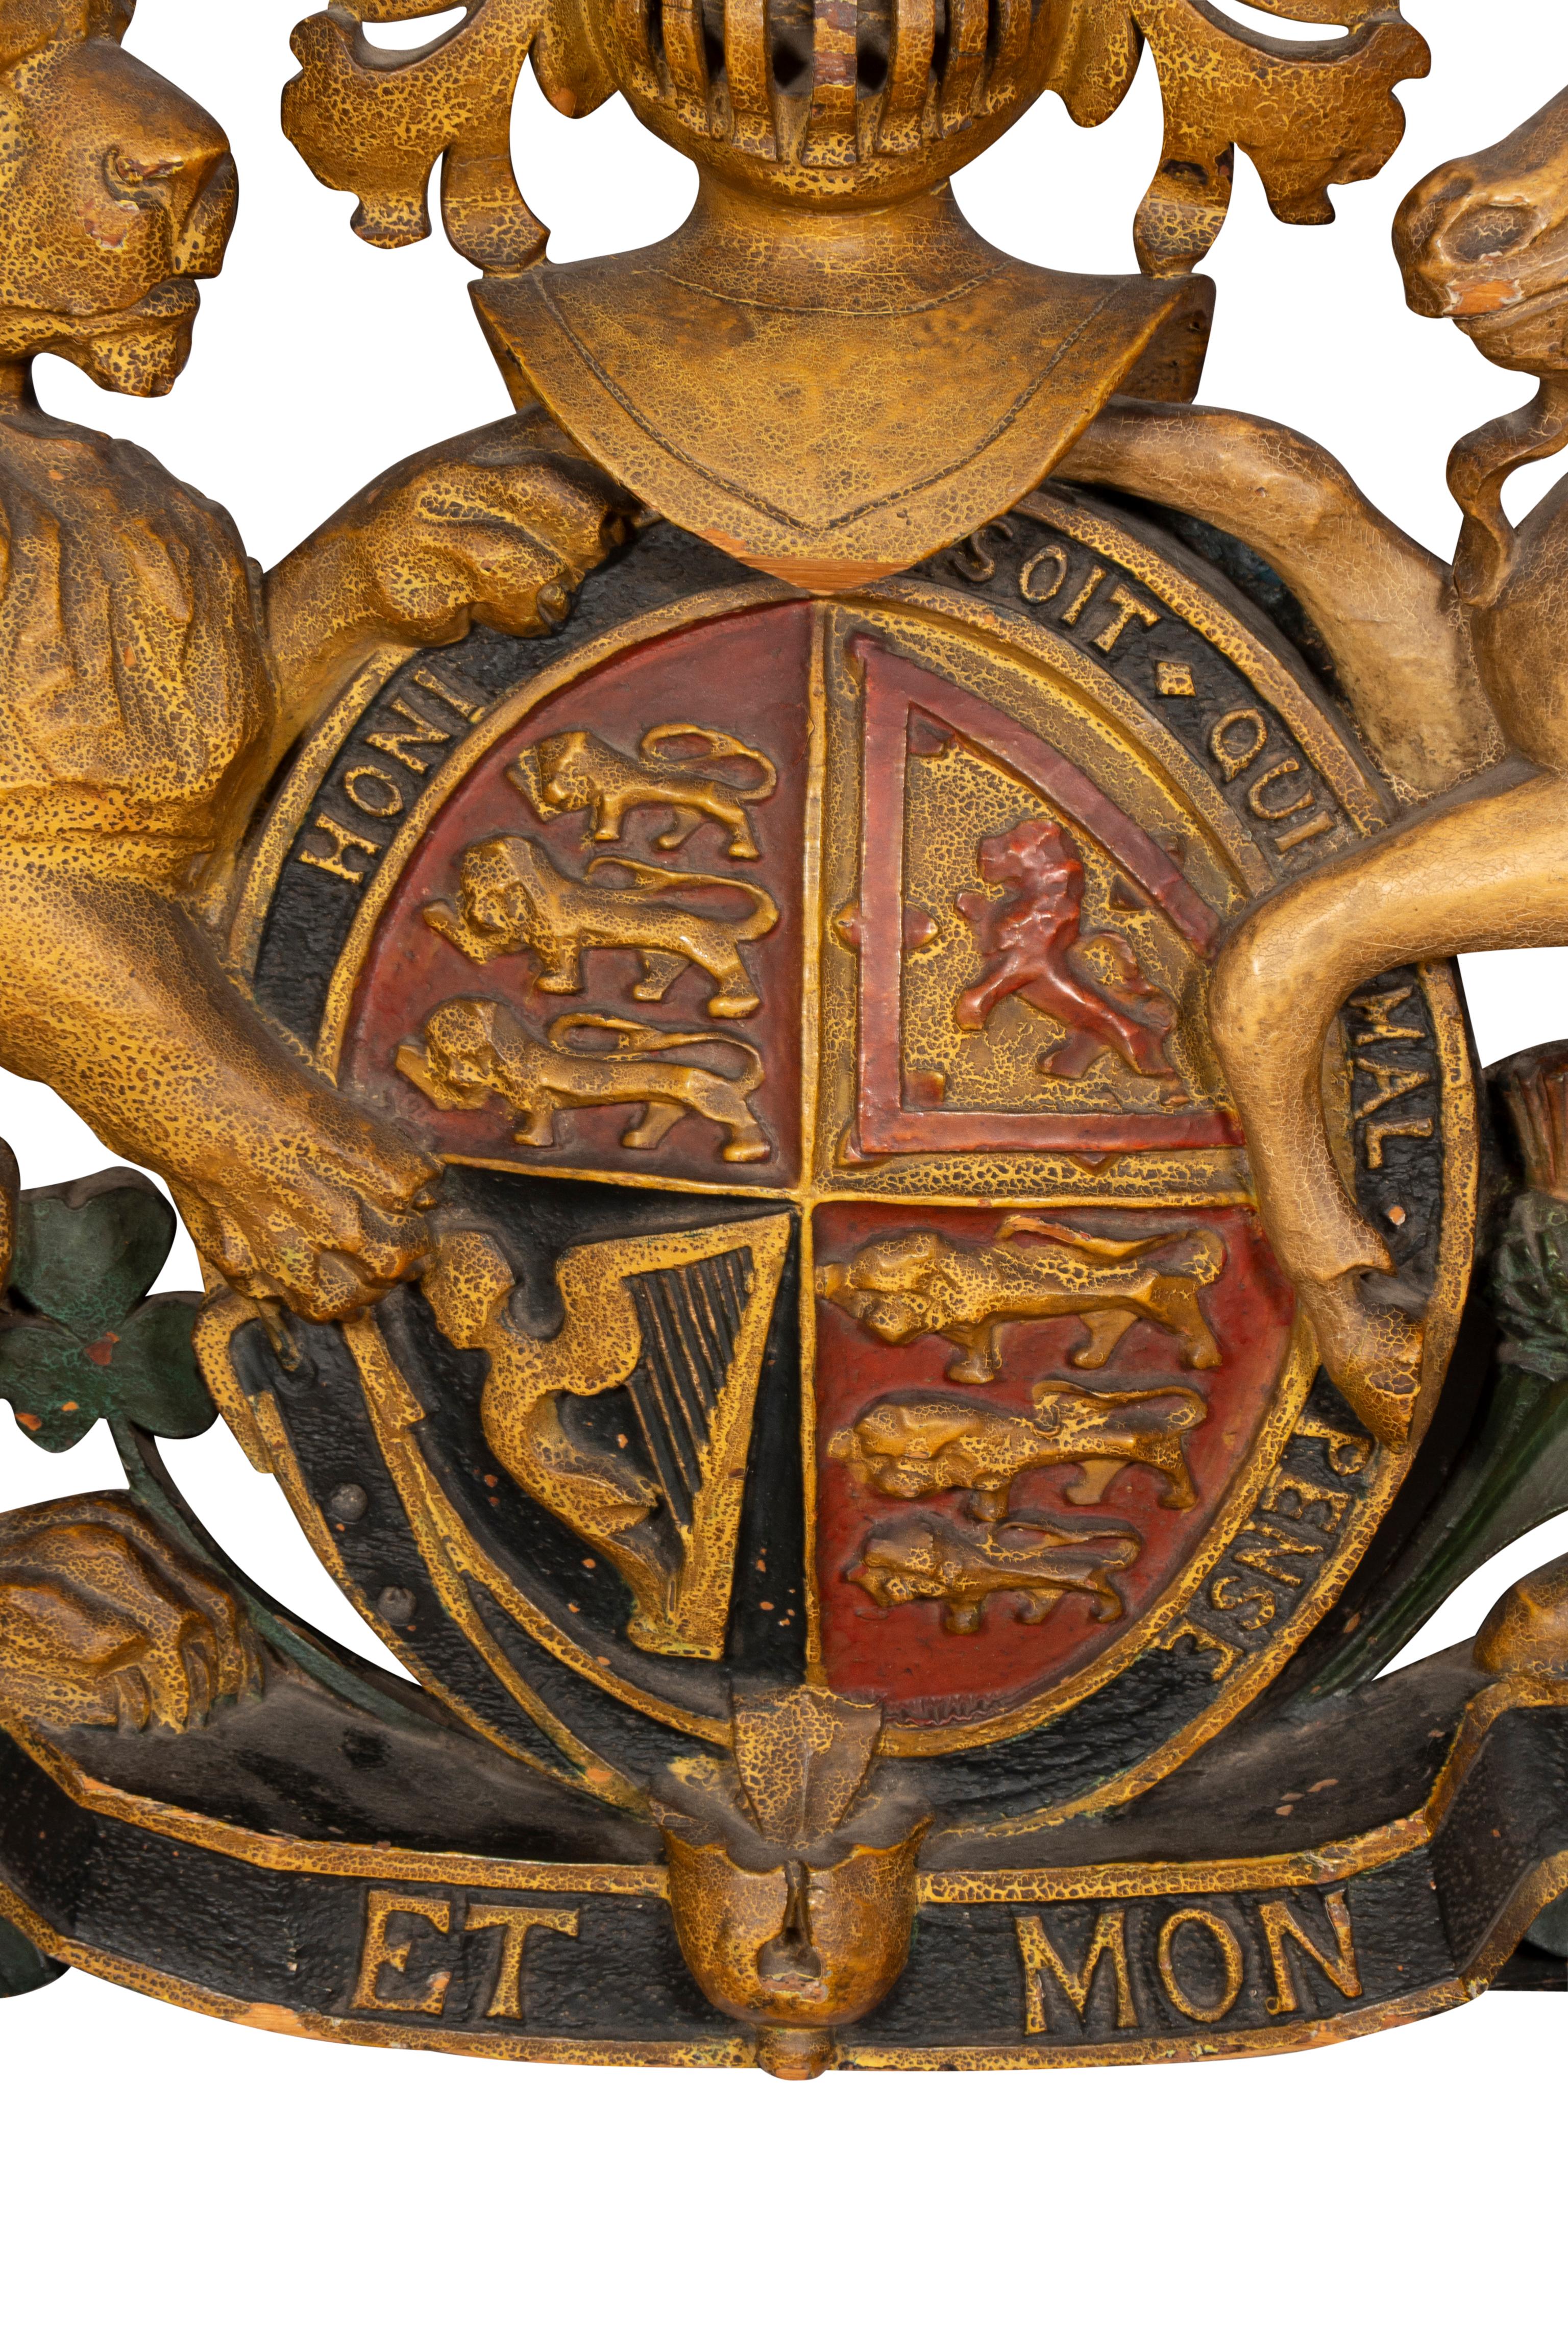 Painted Polychrome Carved Wood Coat Of Arms Of The United Kingdom